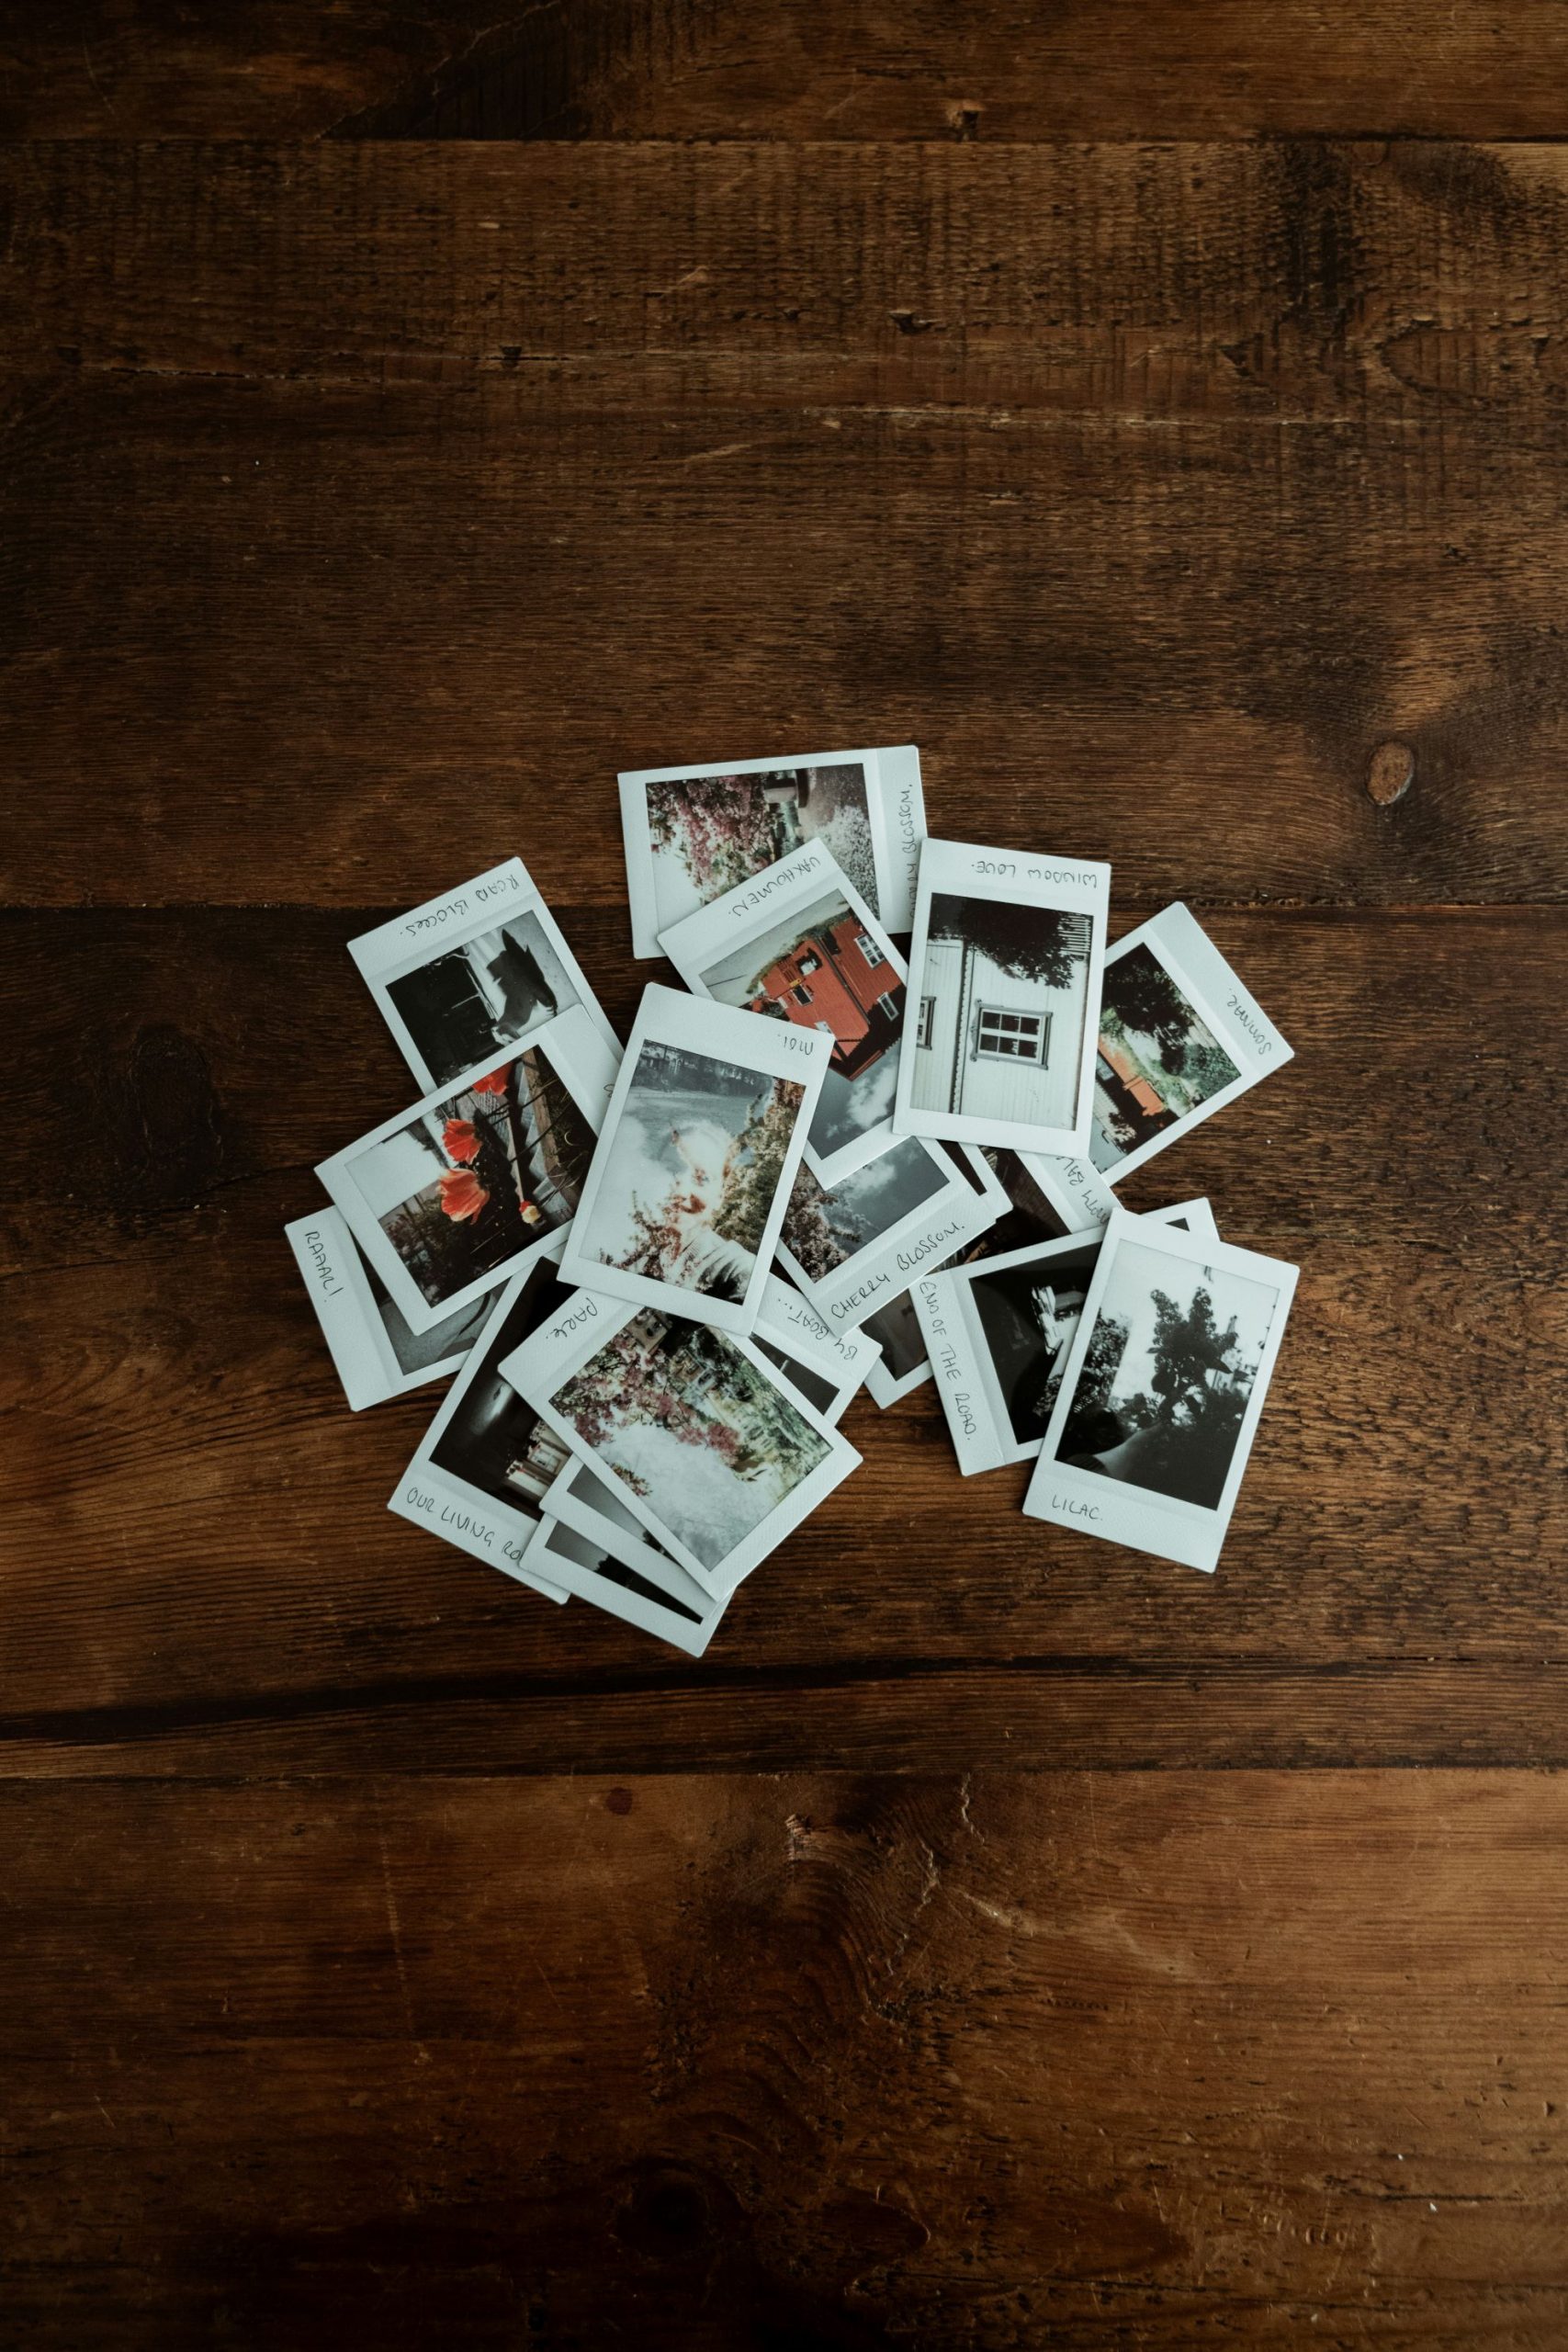 Using images on your website represented by a pile of polaroid photos on a wooden floor